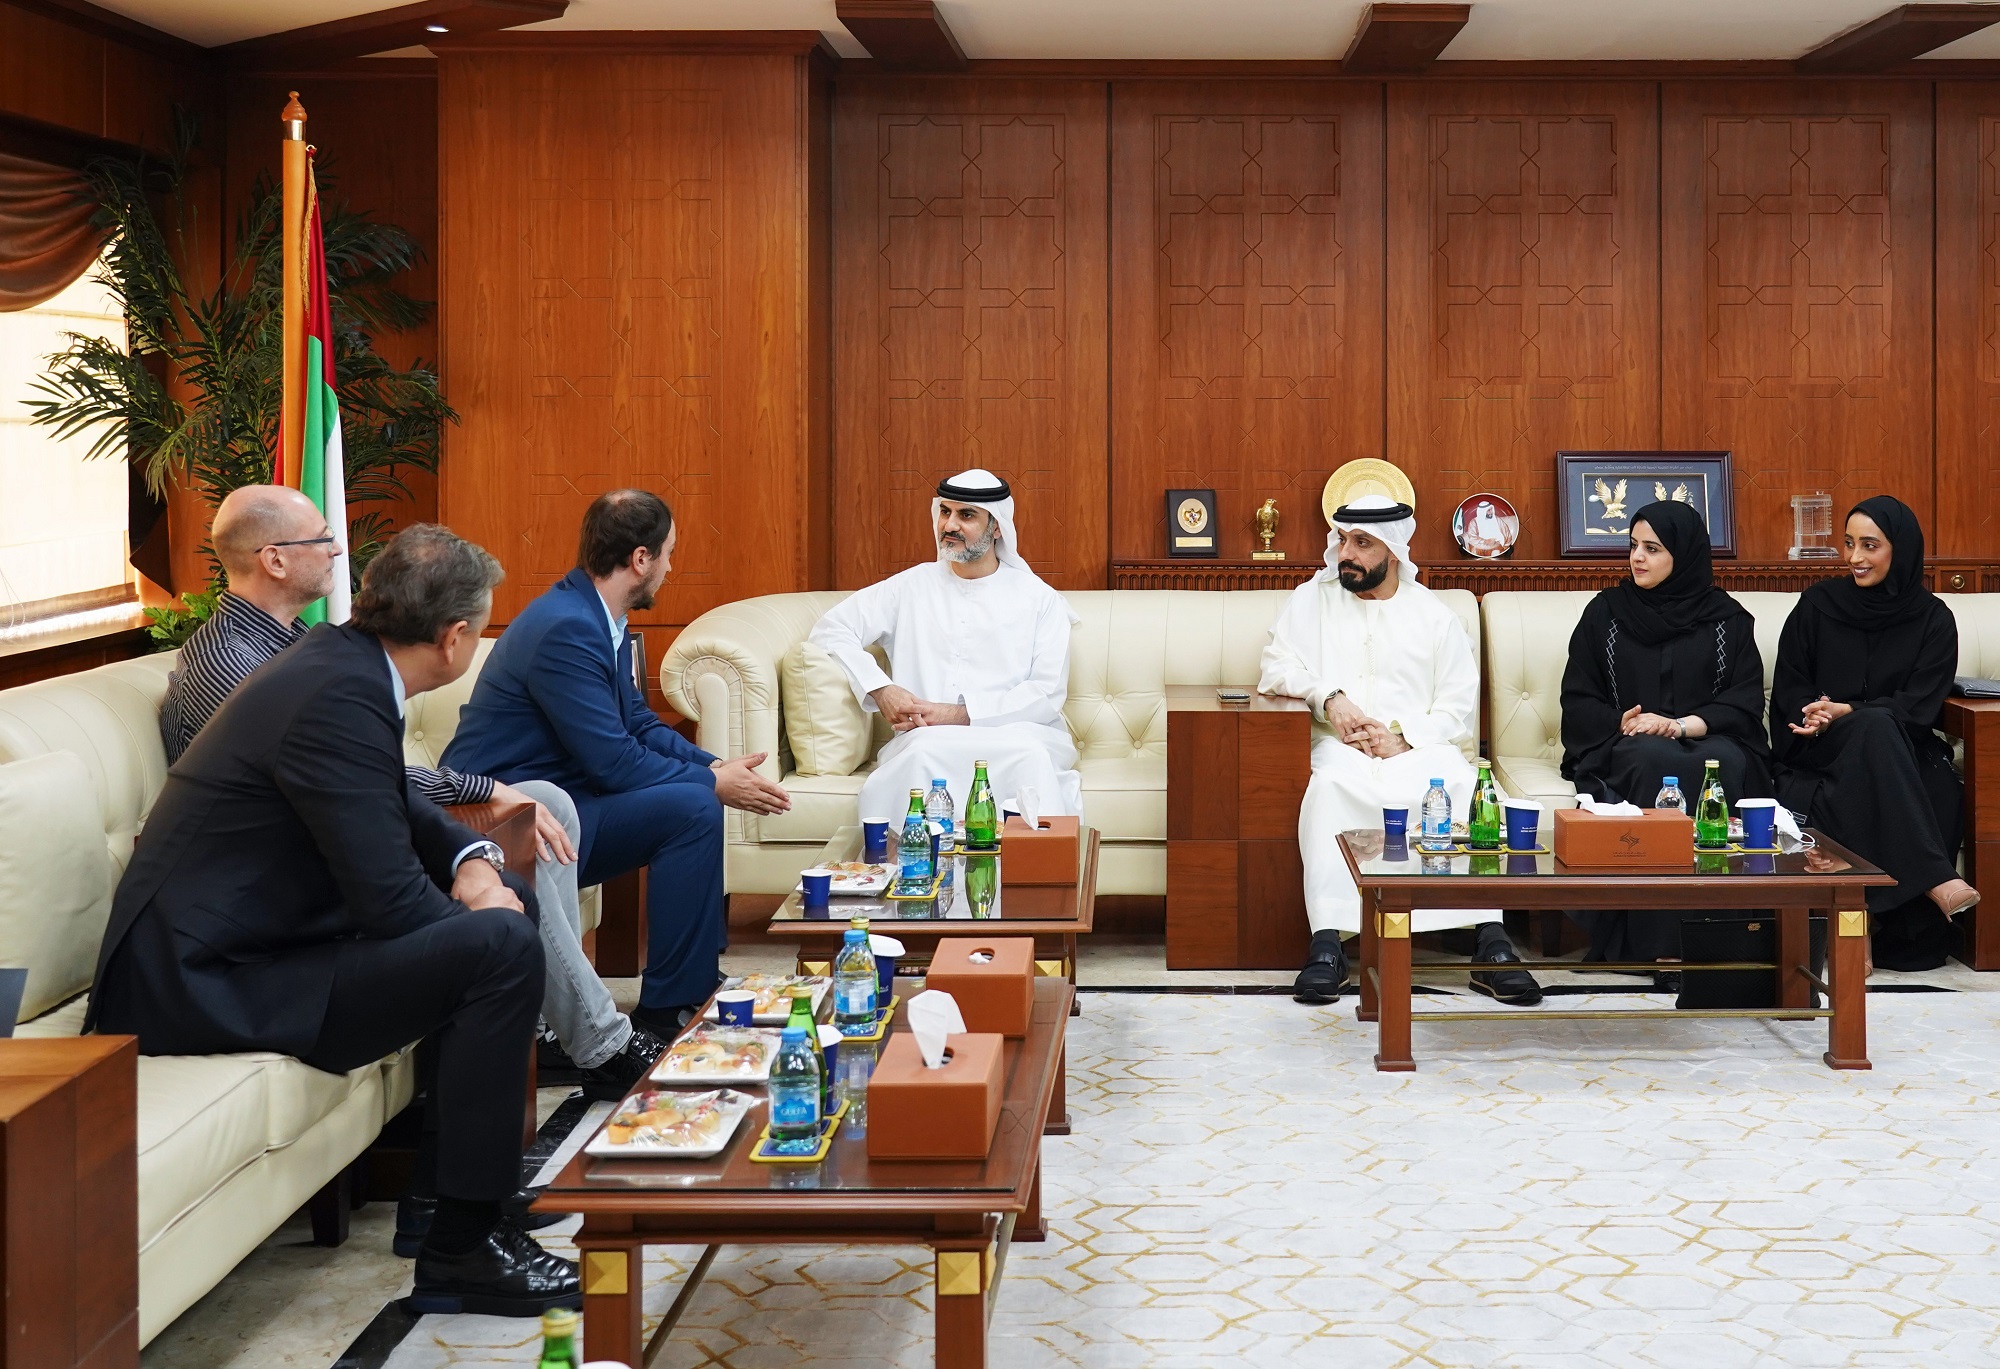 Ajman Chamber And Ajman Free Zone Discuss Economic Cooperation With The Consulate General Of Russia.